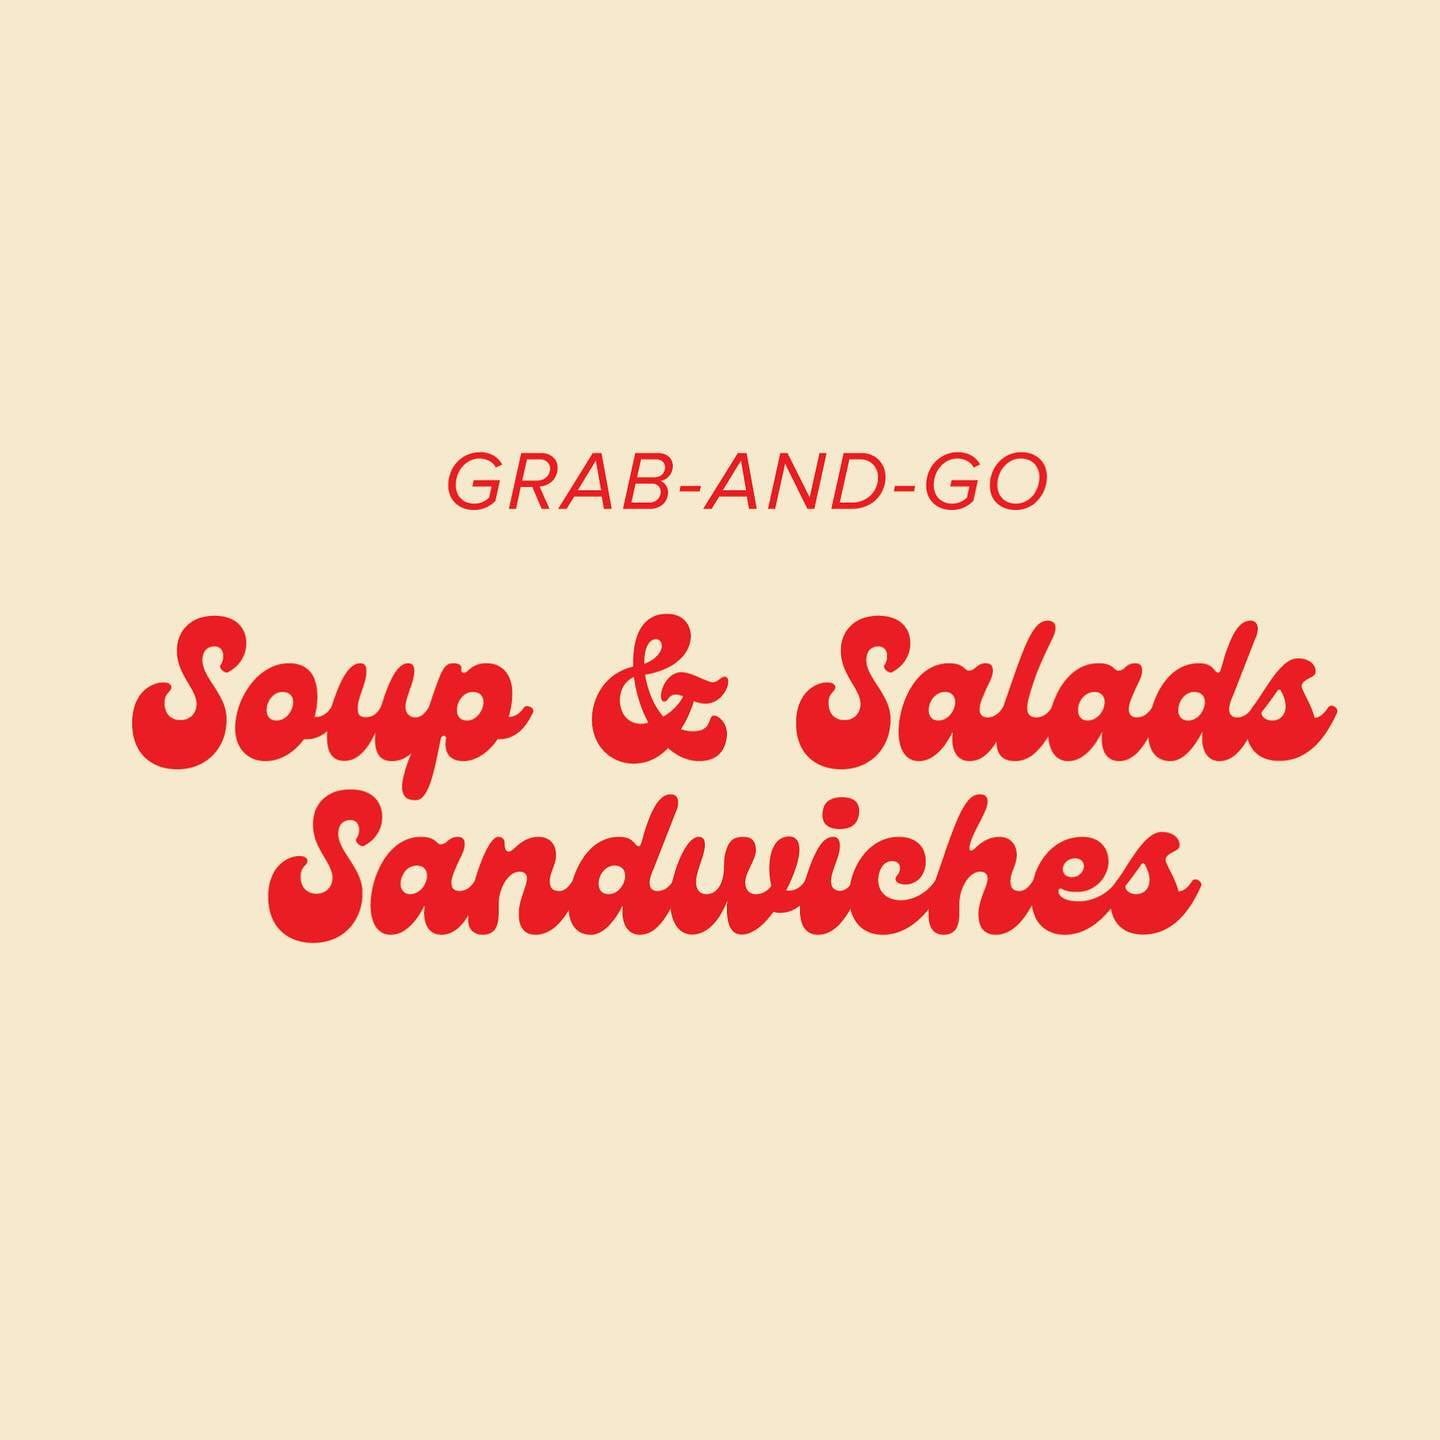 Looking for a quick lunch? We have you covered! Check out our Marketplace for fresh salads, deli sandwiches, sides and more!